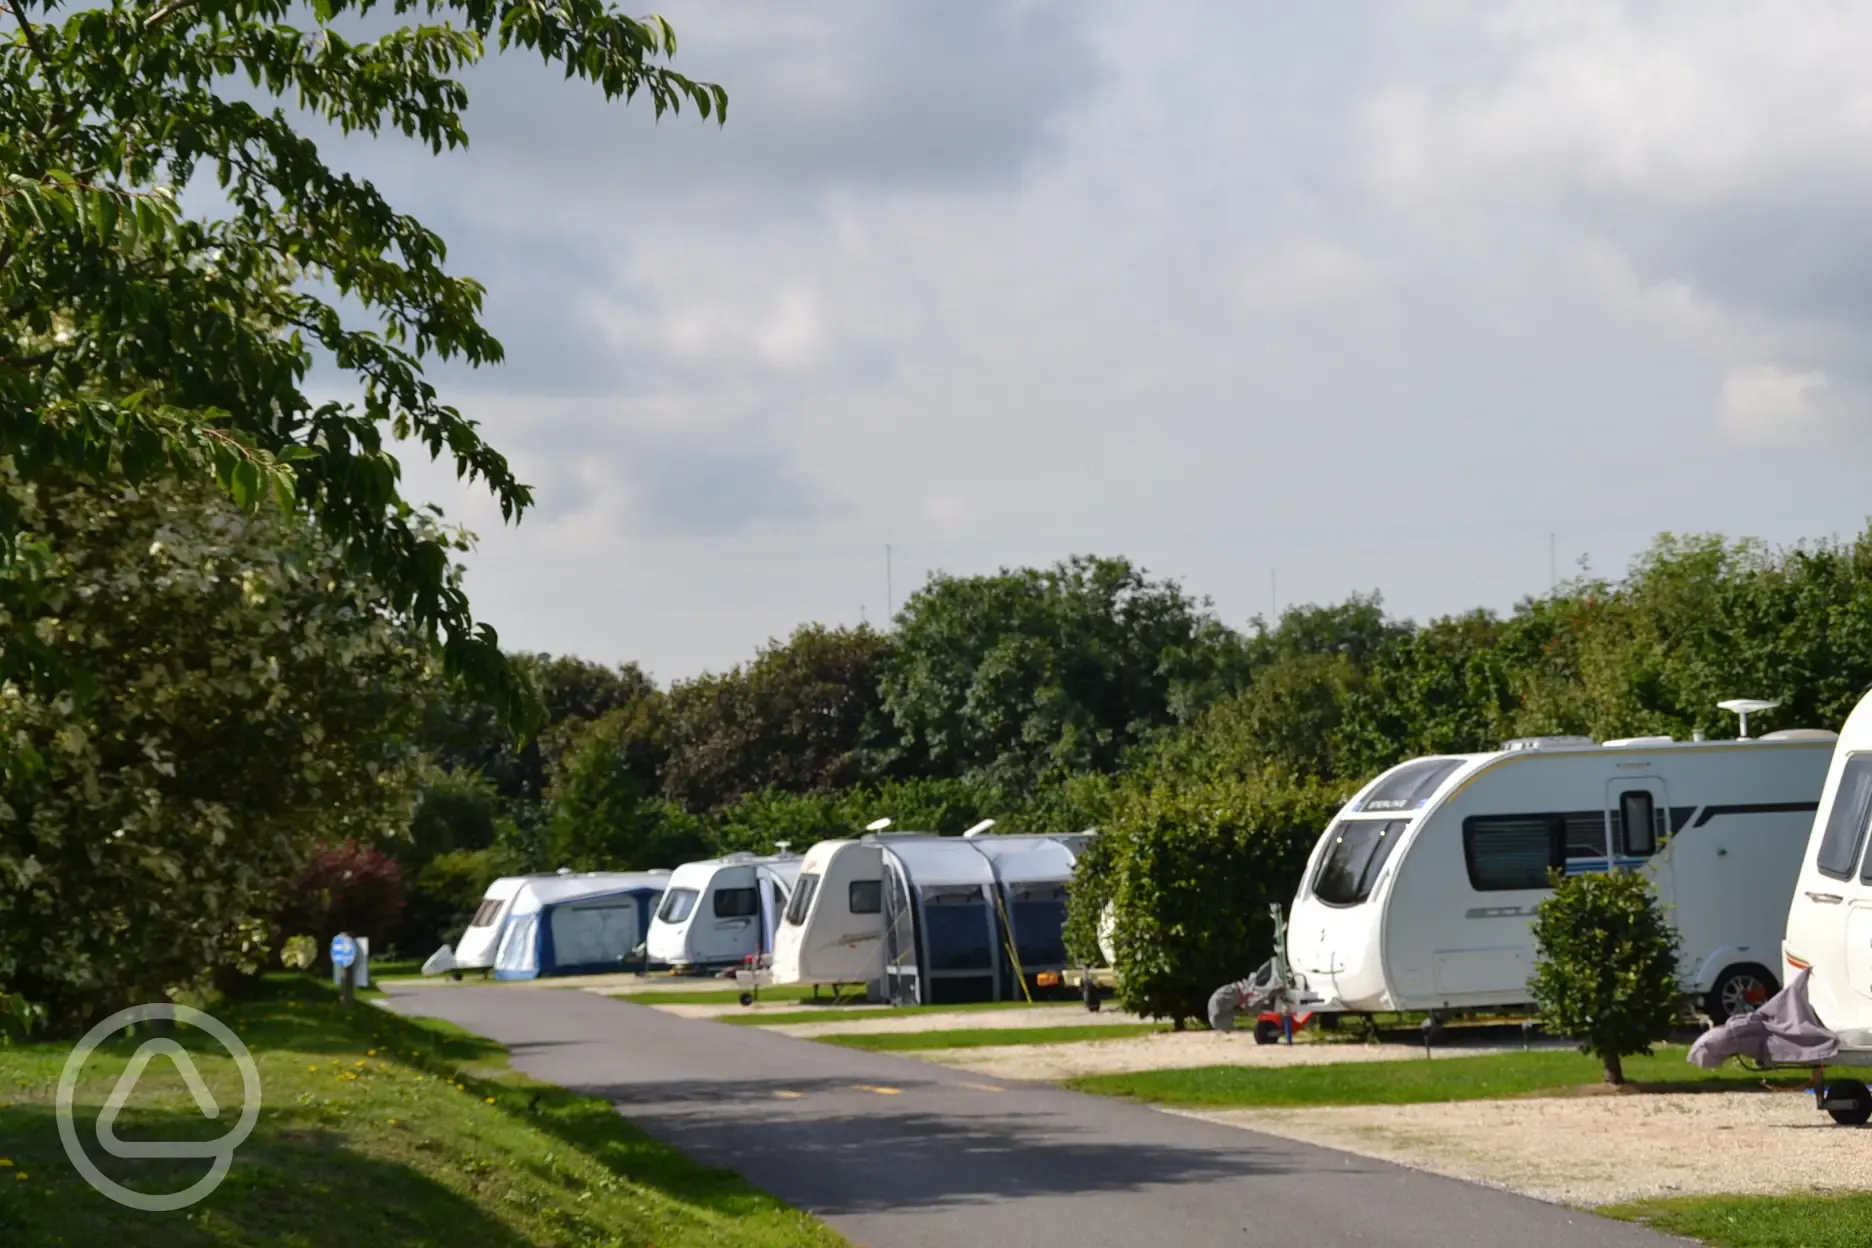 Pitches at Jacobs Mount Caravan and Camping Park